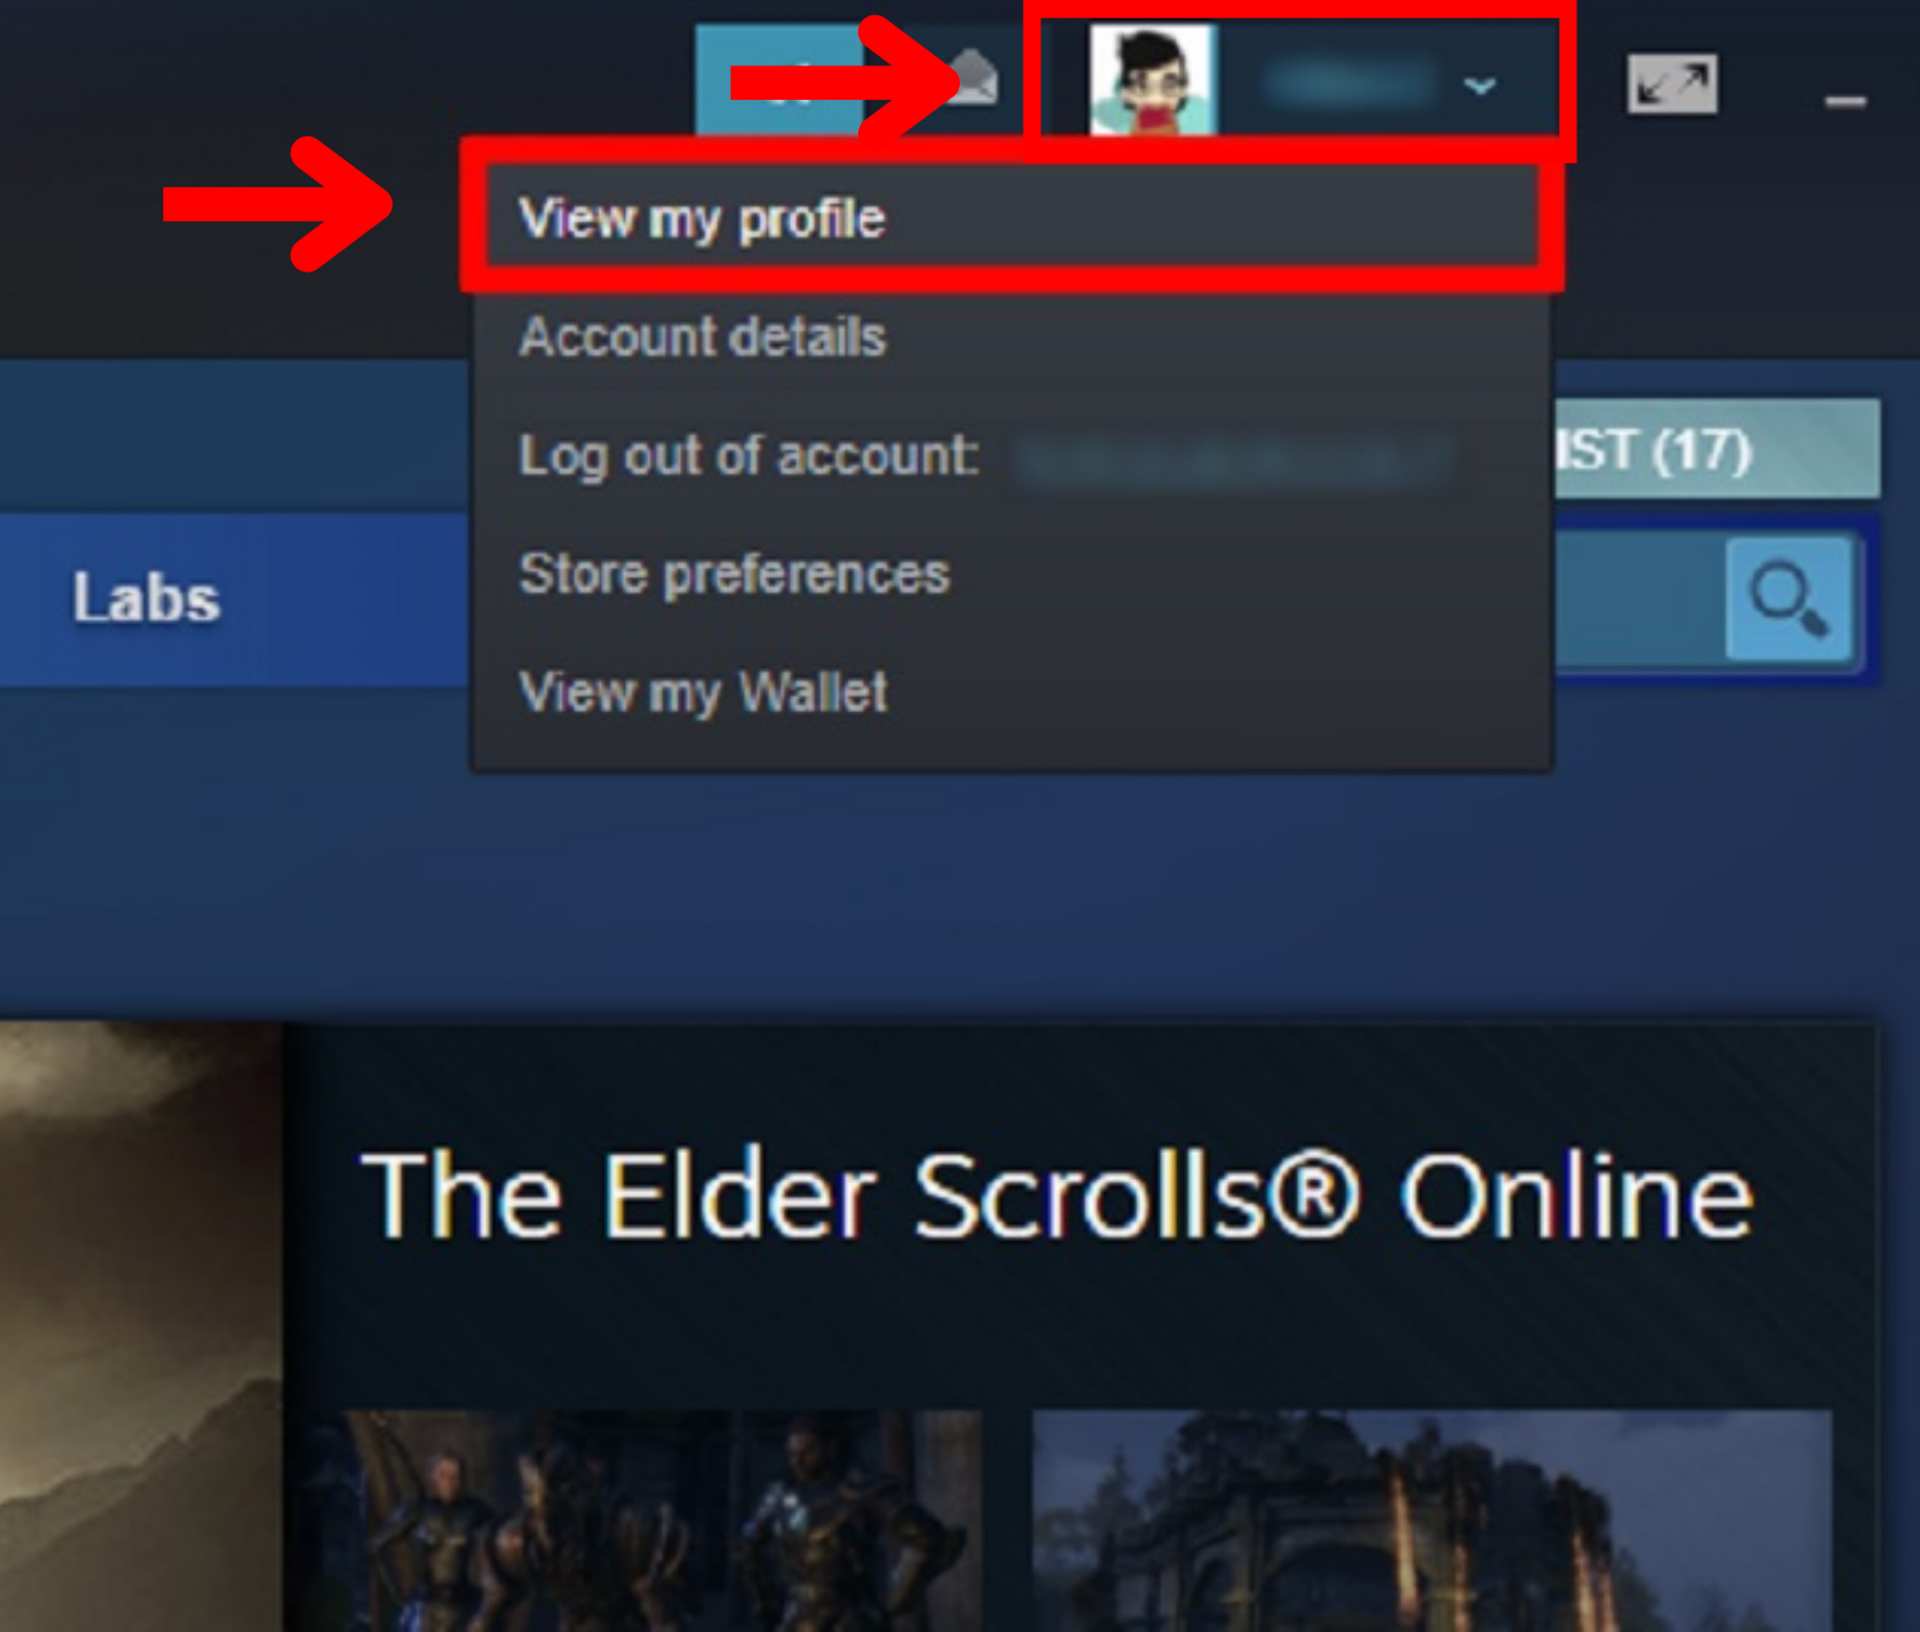 On your Steam page